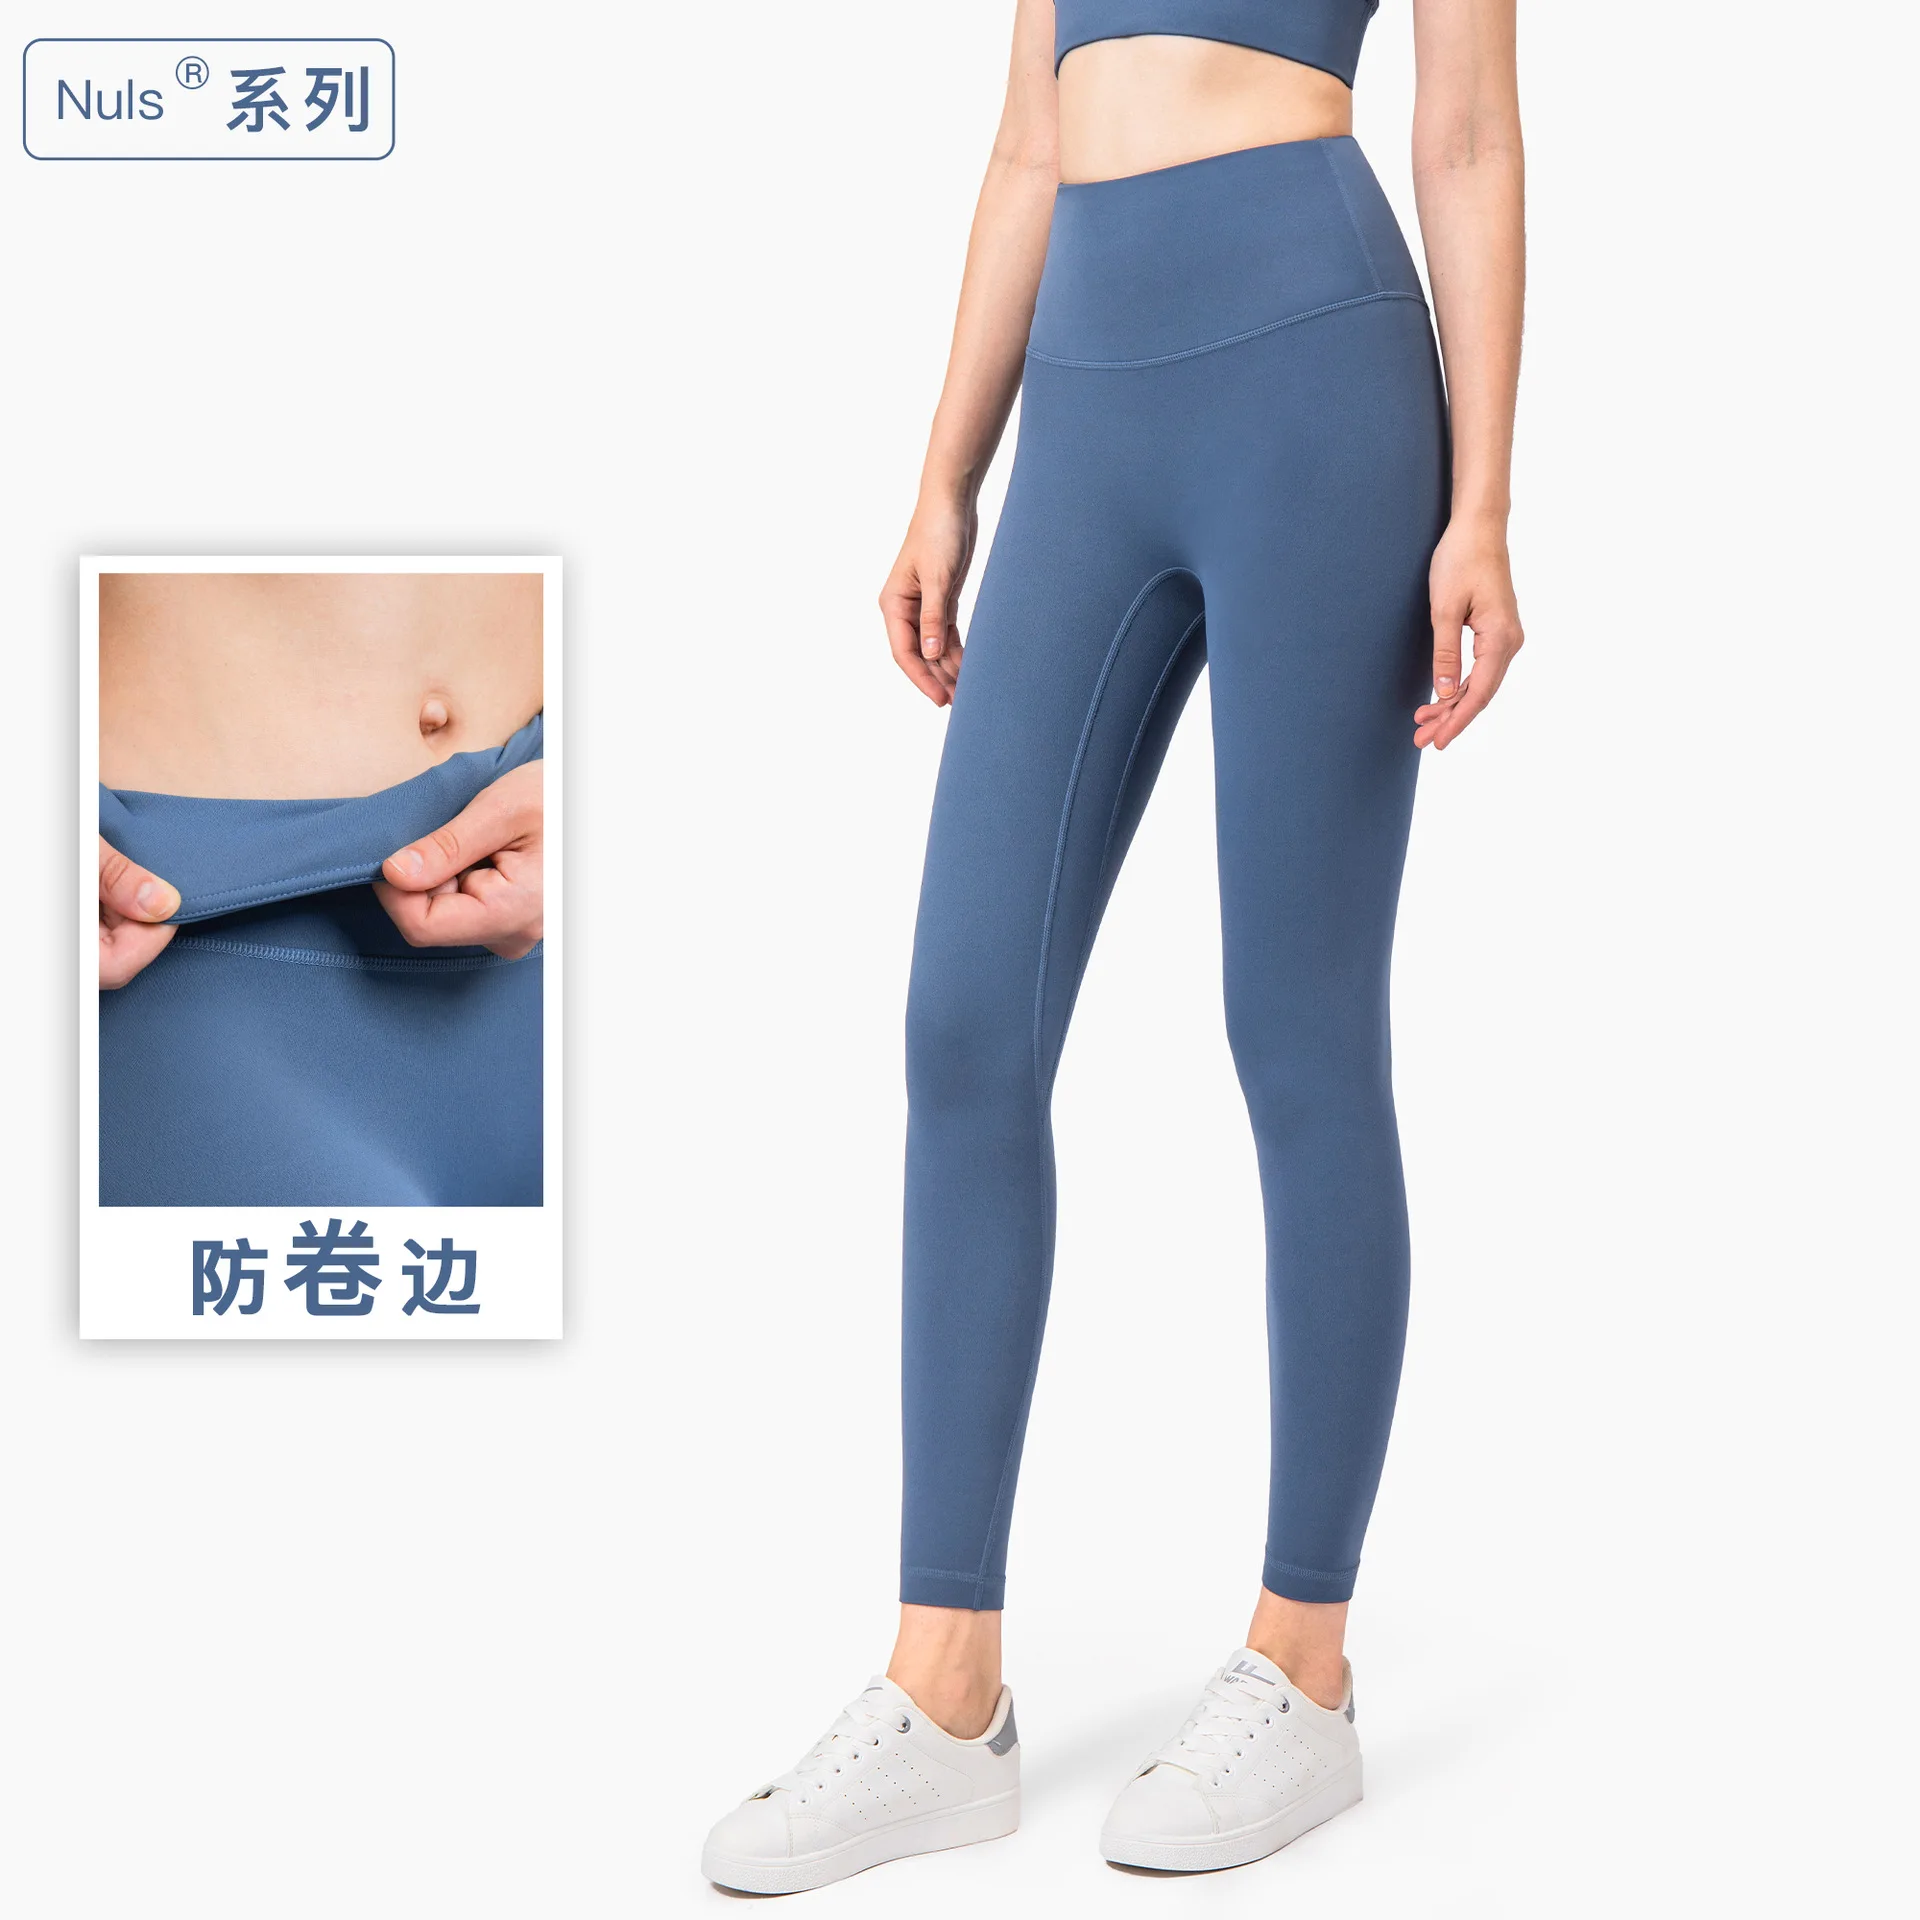 

NULS new European and American high waist anti-flanging lulu yoga pants brand new no embarrassment one piece hip-lifting peach p